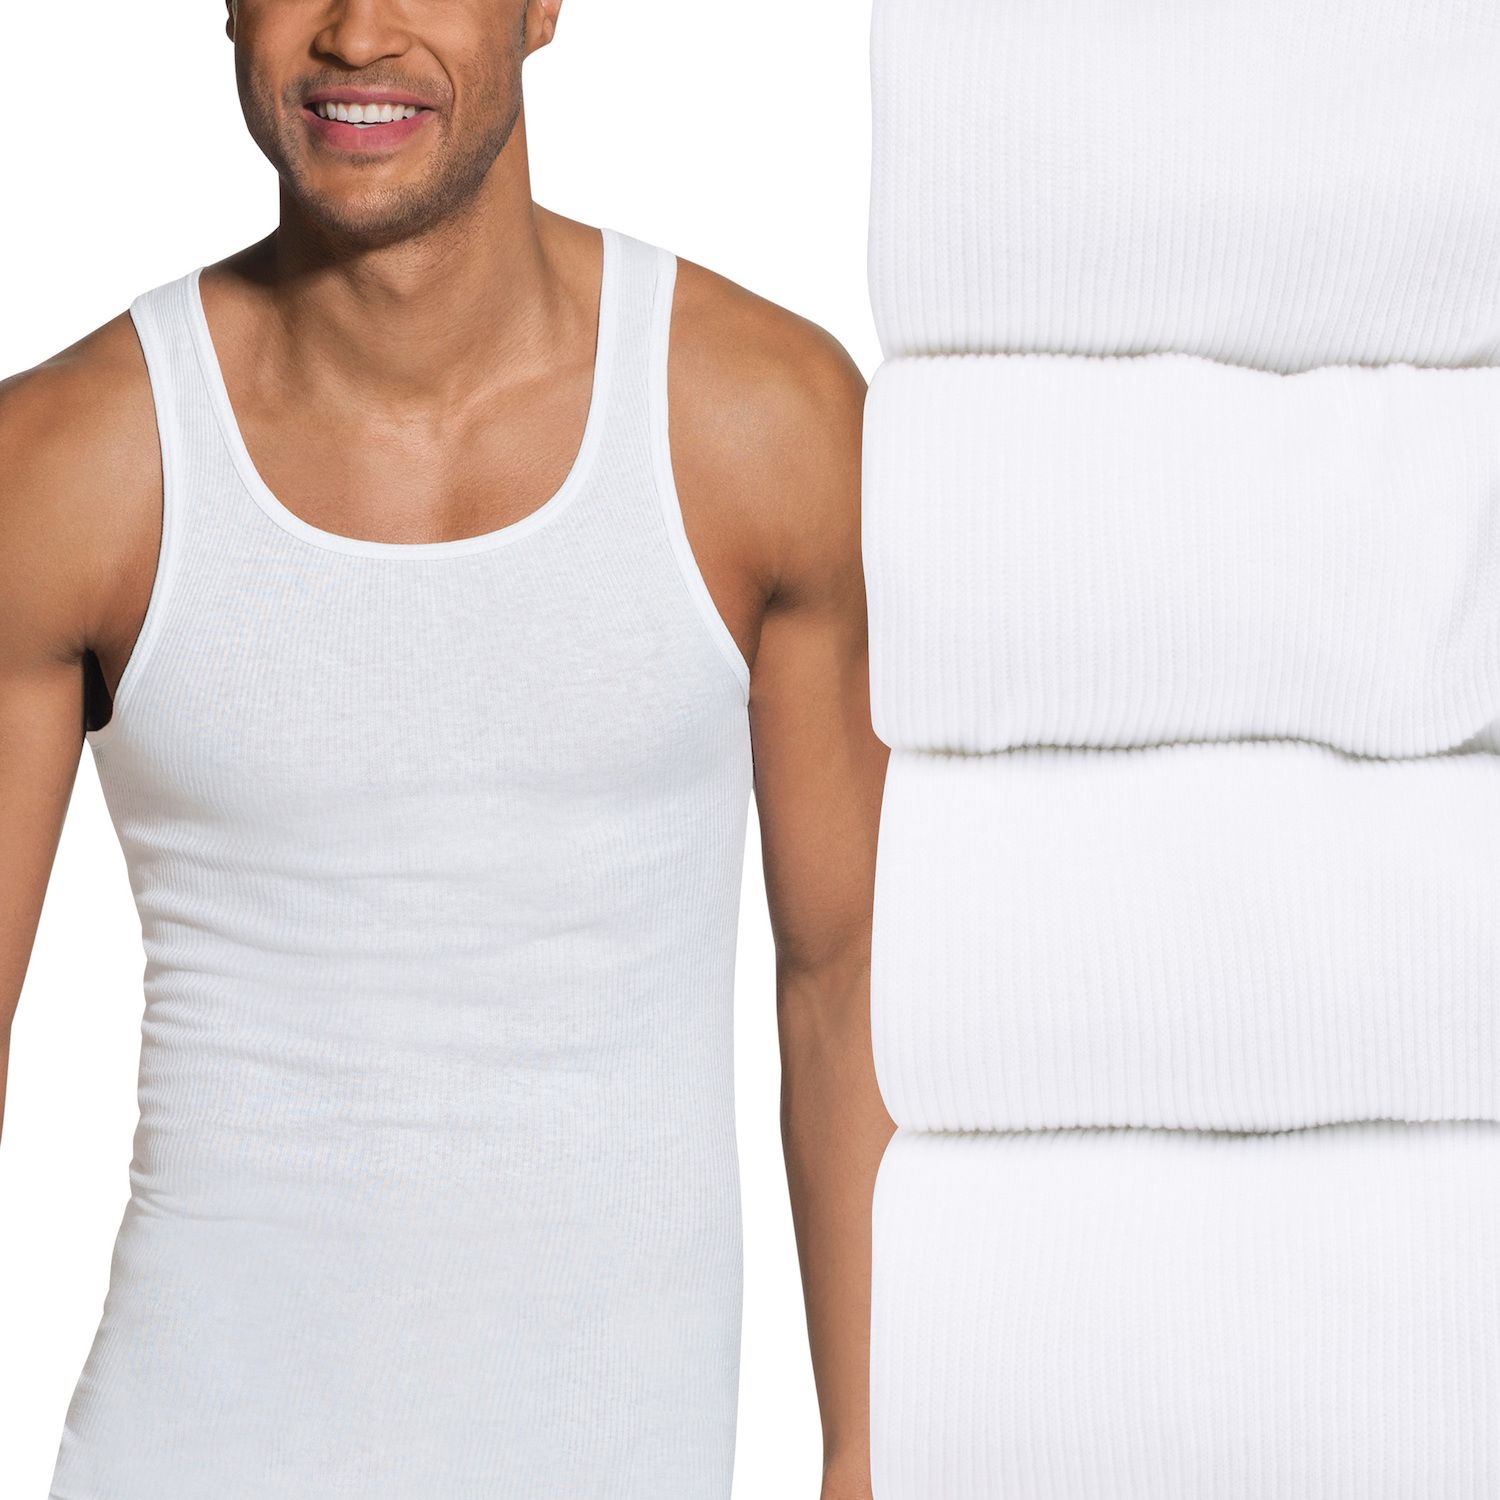 Image for Hanes Men's Big & Tall Ultimate 4-pack ComfortBlend A-Shirts 2XL at Kohl's.